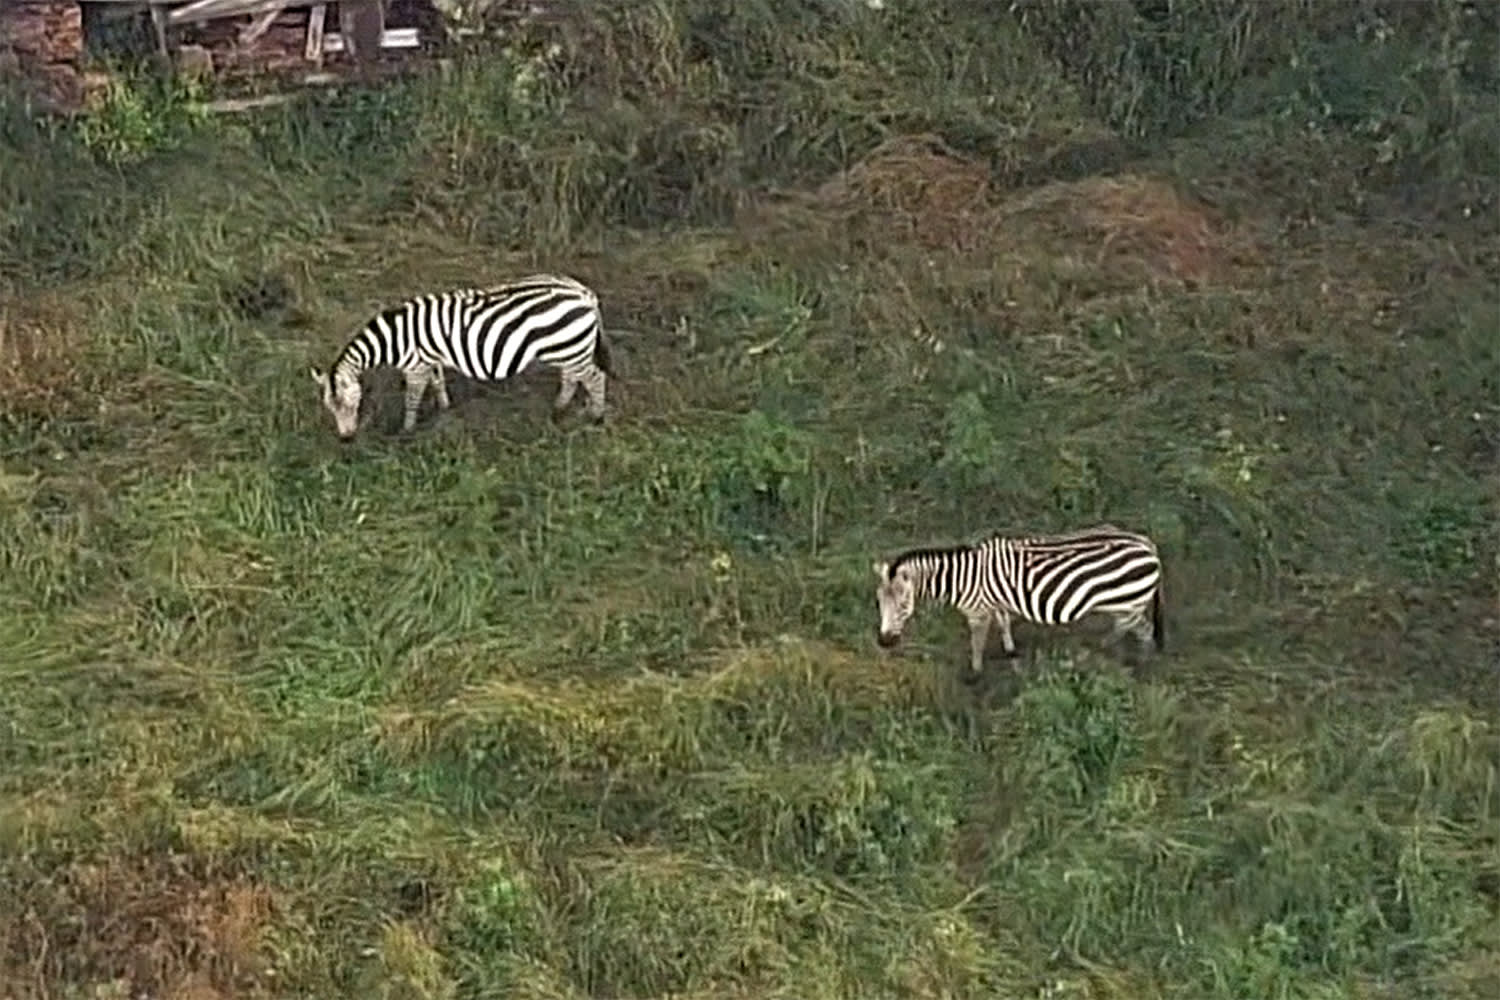 Two ‘at large’ zebras return to Maryland farm four months after escaping